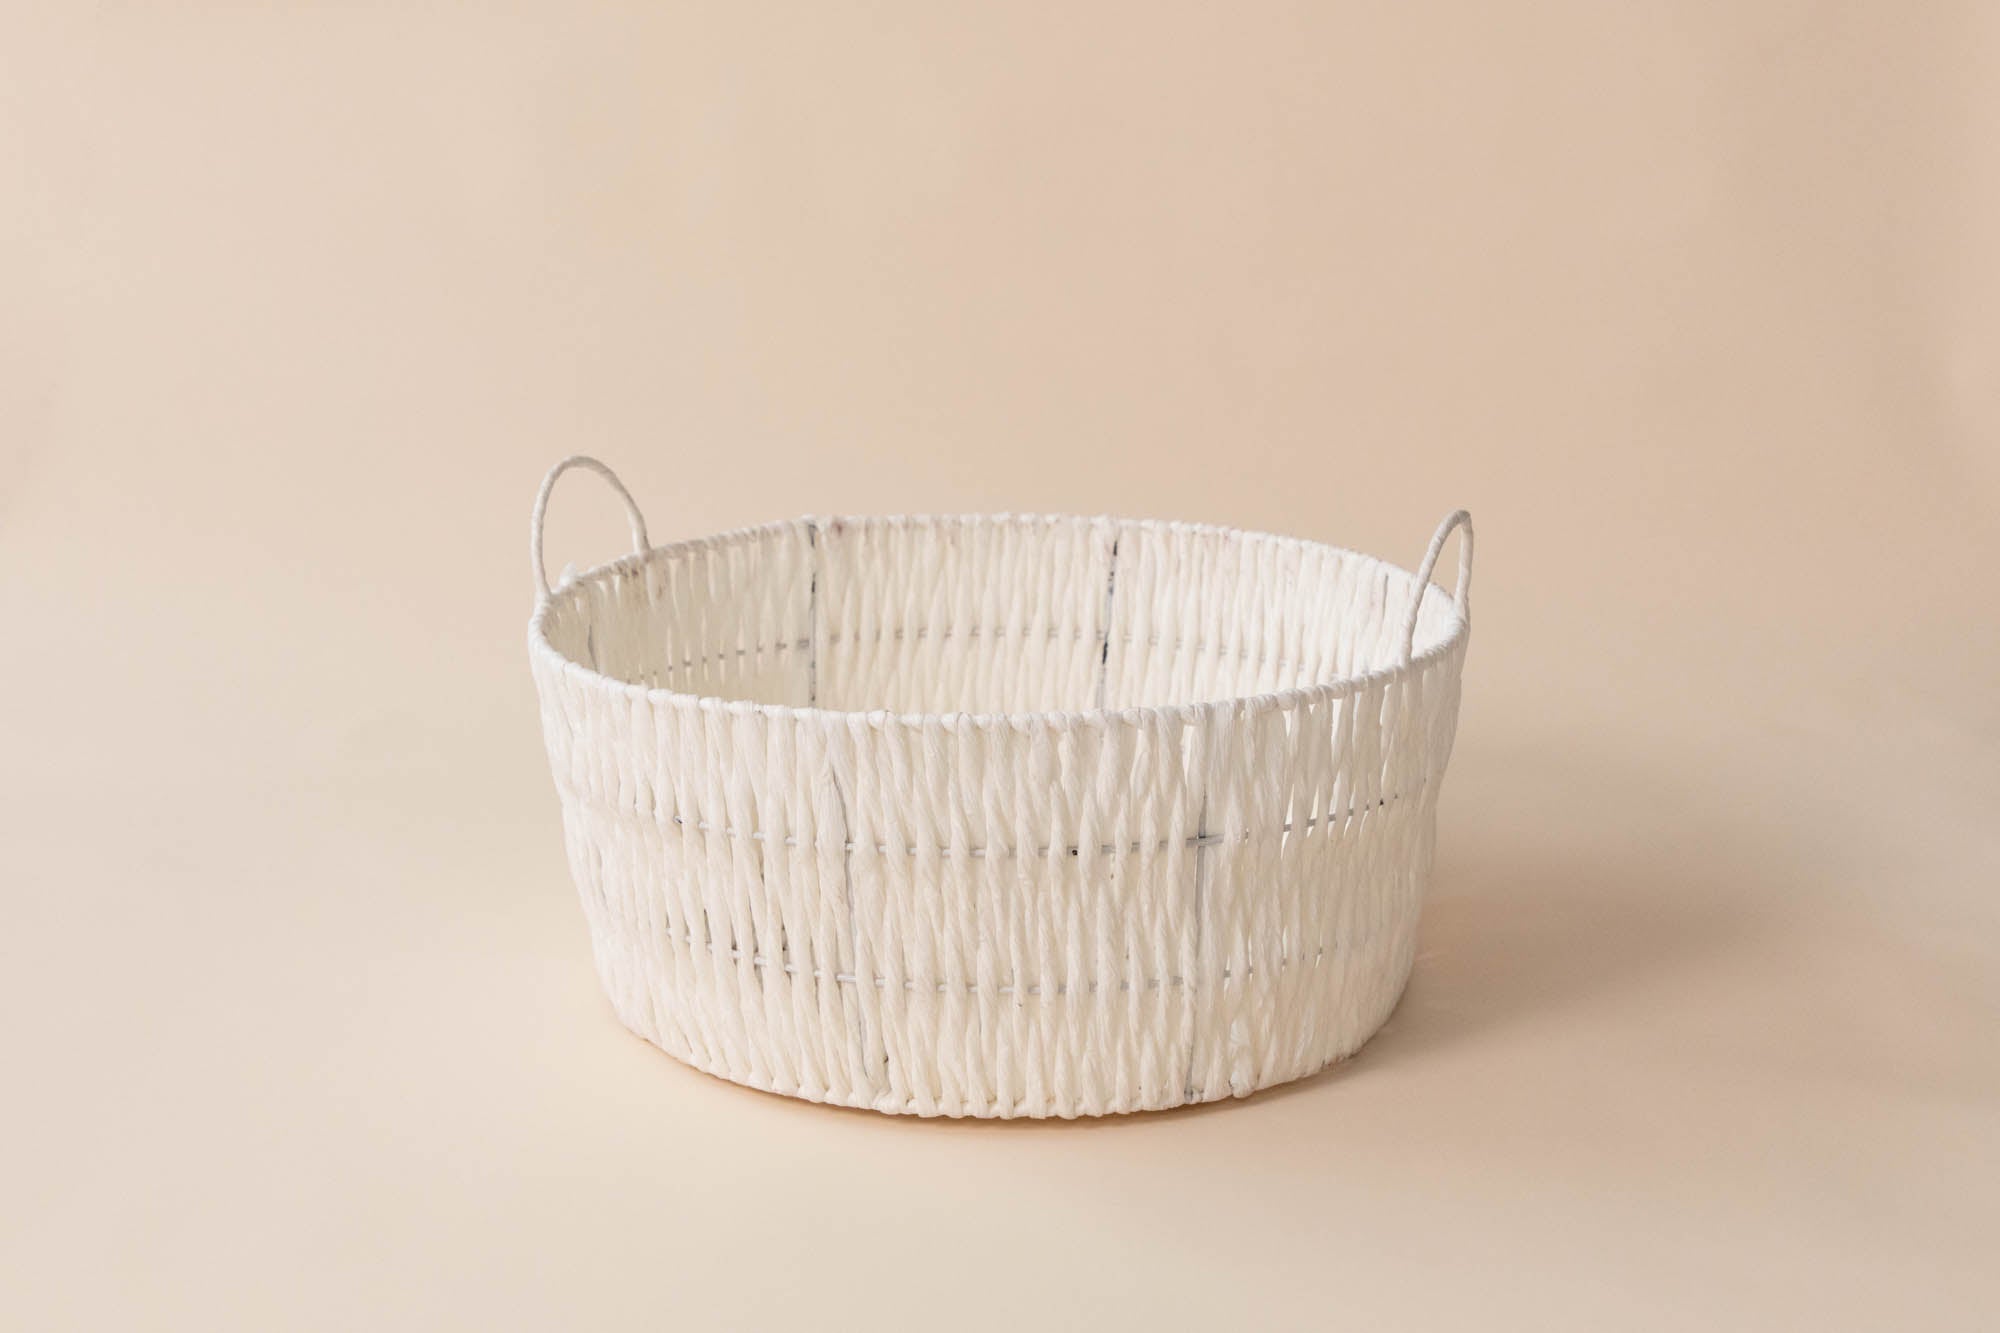 Kate Handmade Woven Round Basket Cream Color Newborn Photography Props